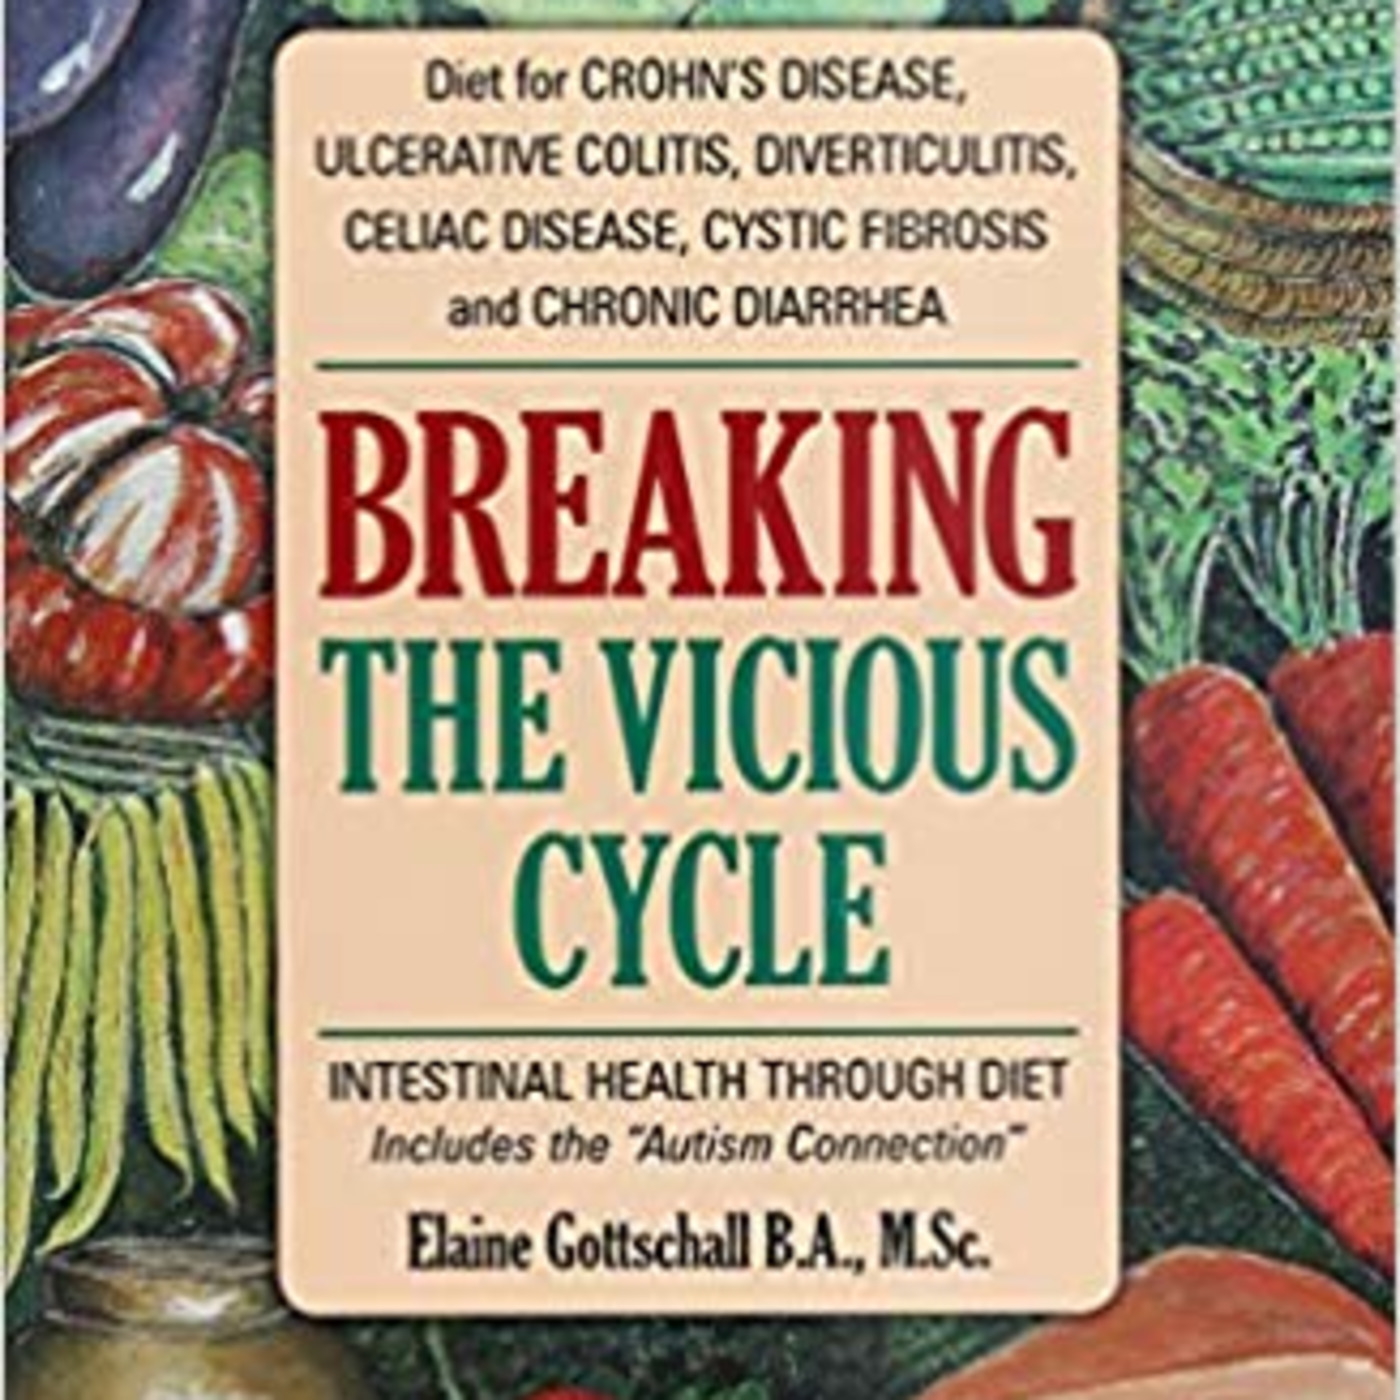 Over 50 years on the Specific Carbohydrate Diet for Ulcerative Colitis: Judy Herod, Daughter of Elaine Gottschall